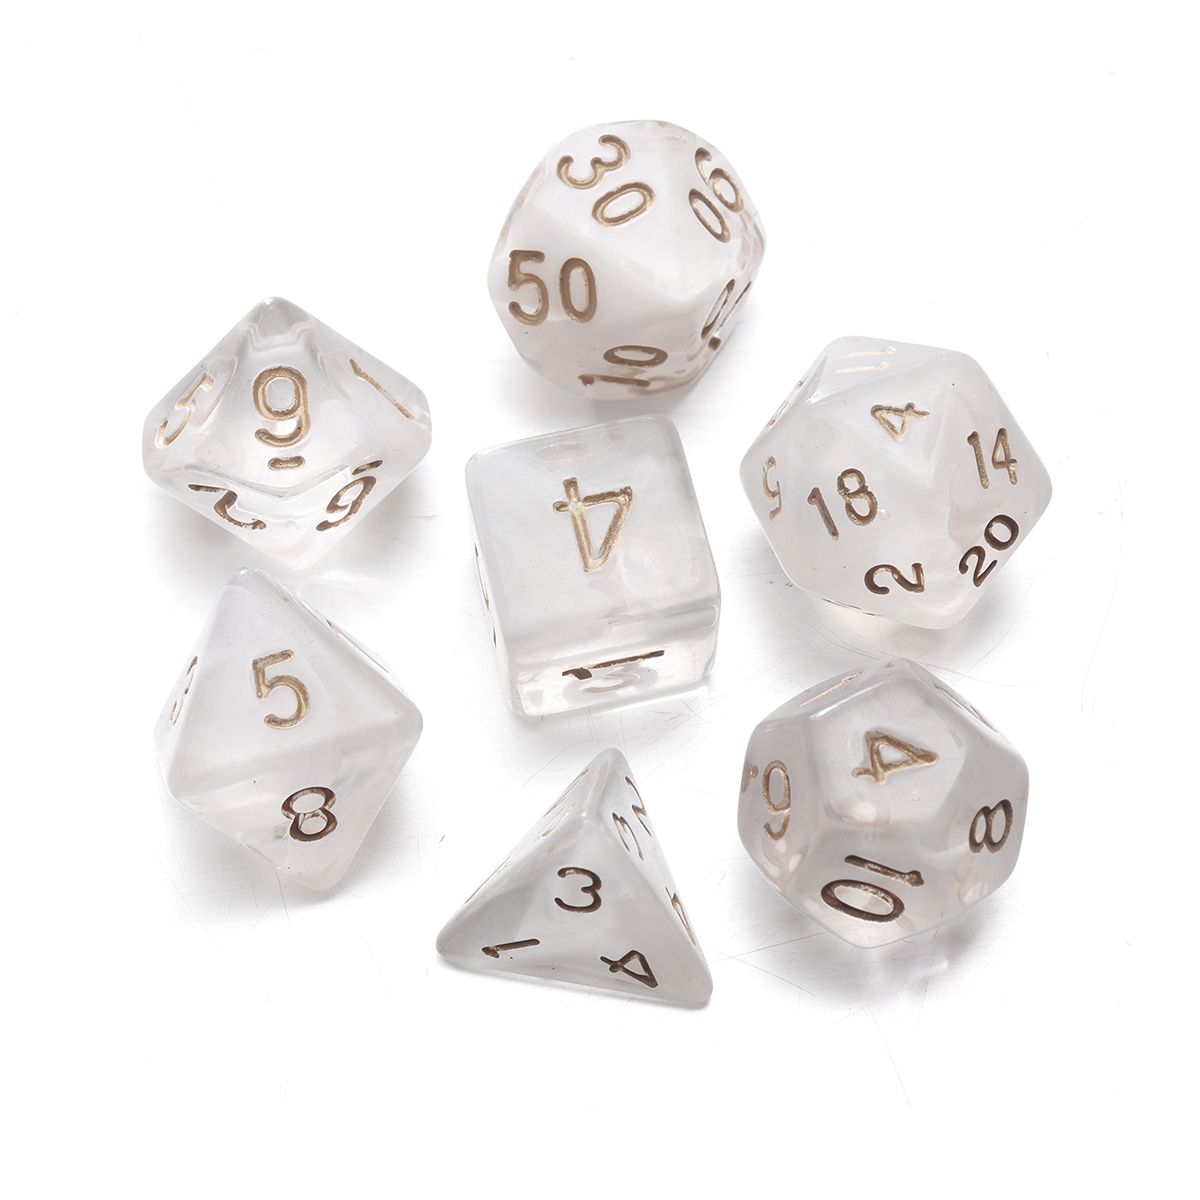 7pcs-Set-Embossed-Polyhedral-Dices-DND-RPG-MTG-Role-Playing-Board-Game-Dices-Set-1627969